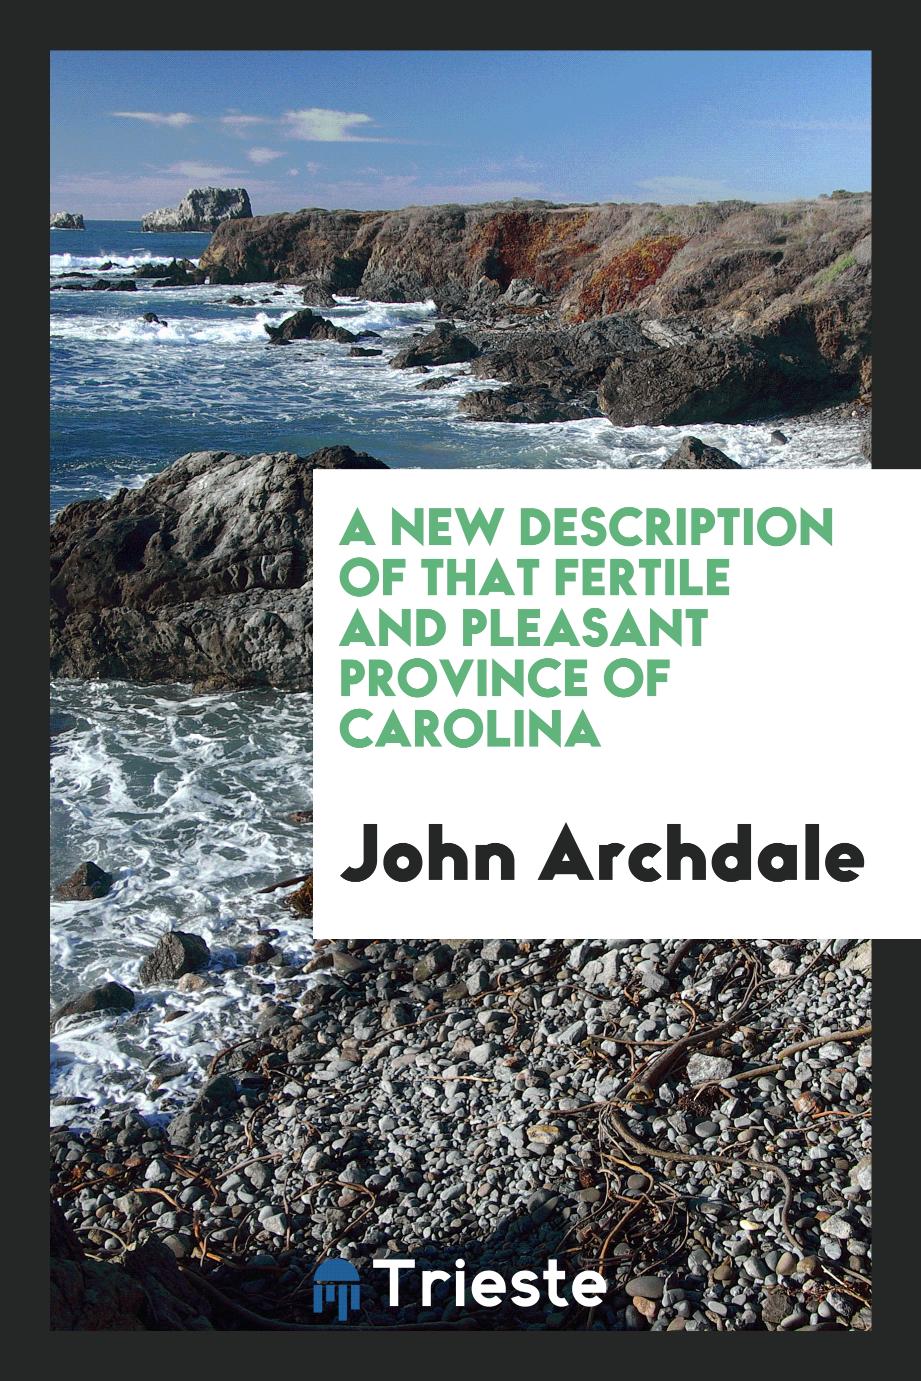 John Archdale - A New Description of that Fertile and Pleasant Province of Carolina